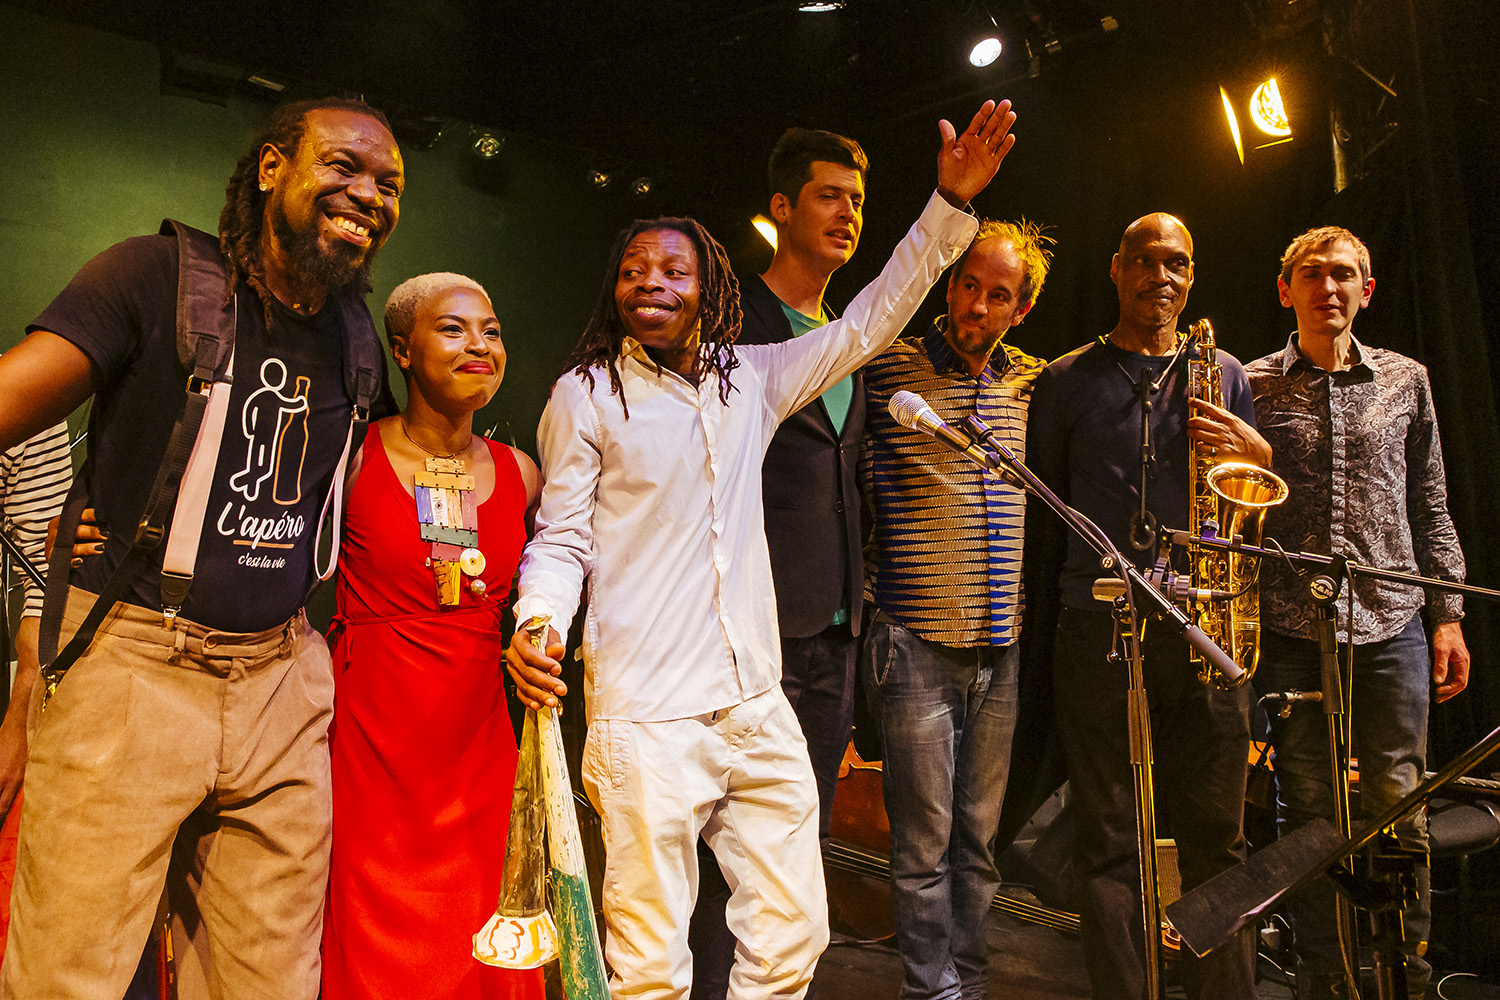 Claude Saturne, Jehyna Sahyeir, Kebyesou, Ches Smith, Thomas Julienne, Thurgot Theodat, Andrea Compagnolo © Margaux Rodrigues